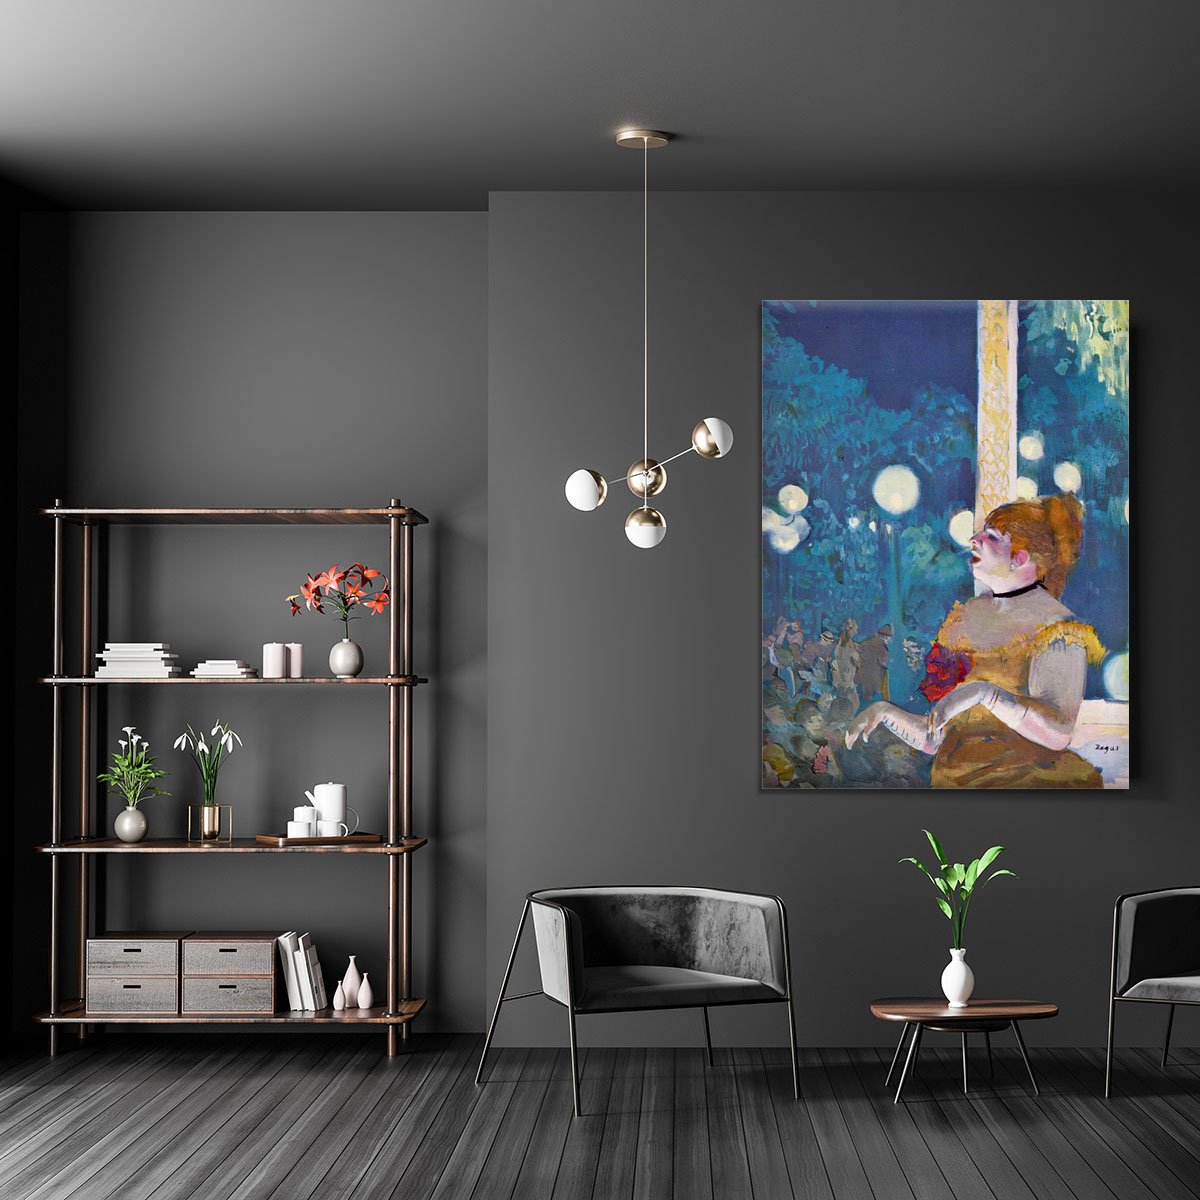 In concert Cafe The Songs of the dog by Degas Canvas Print or Poster